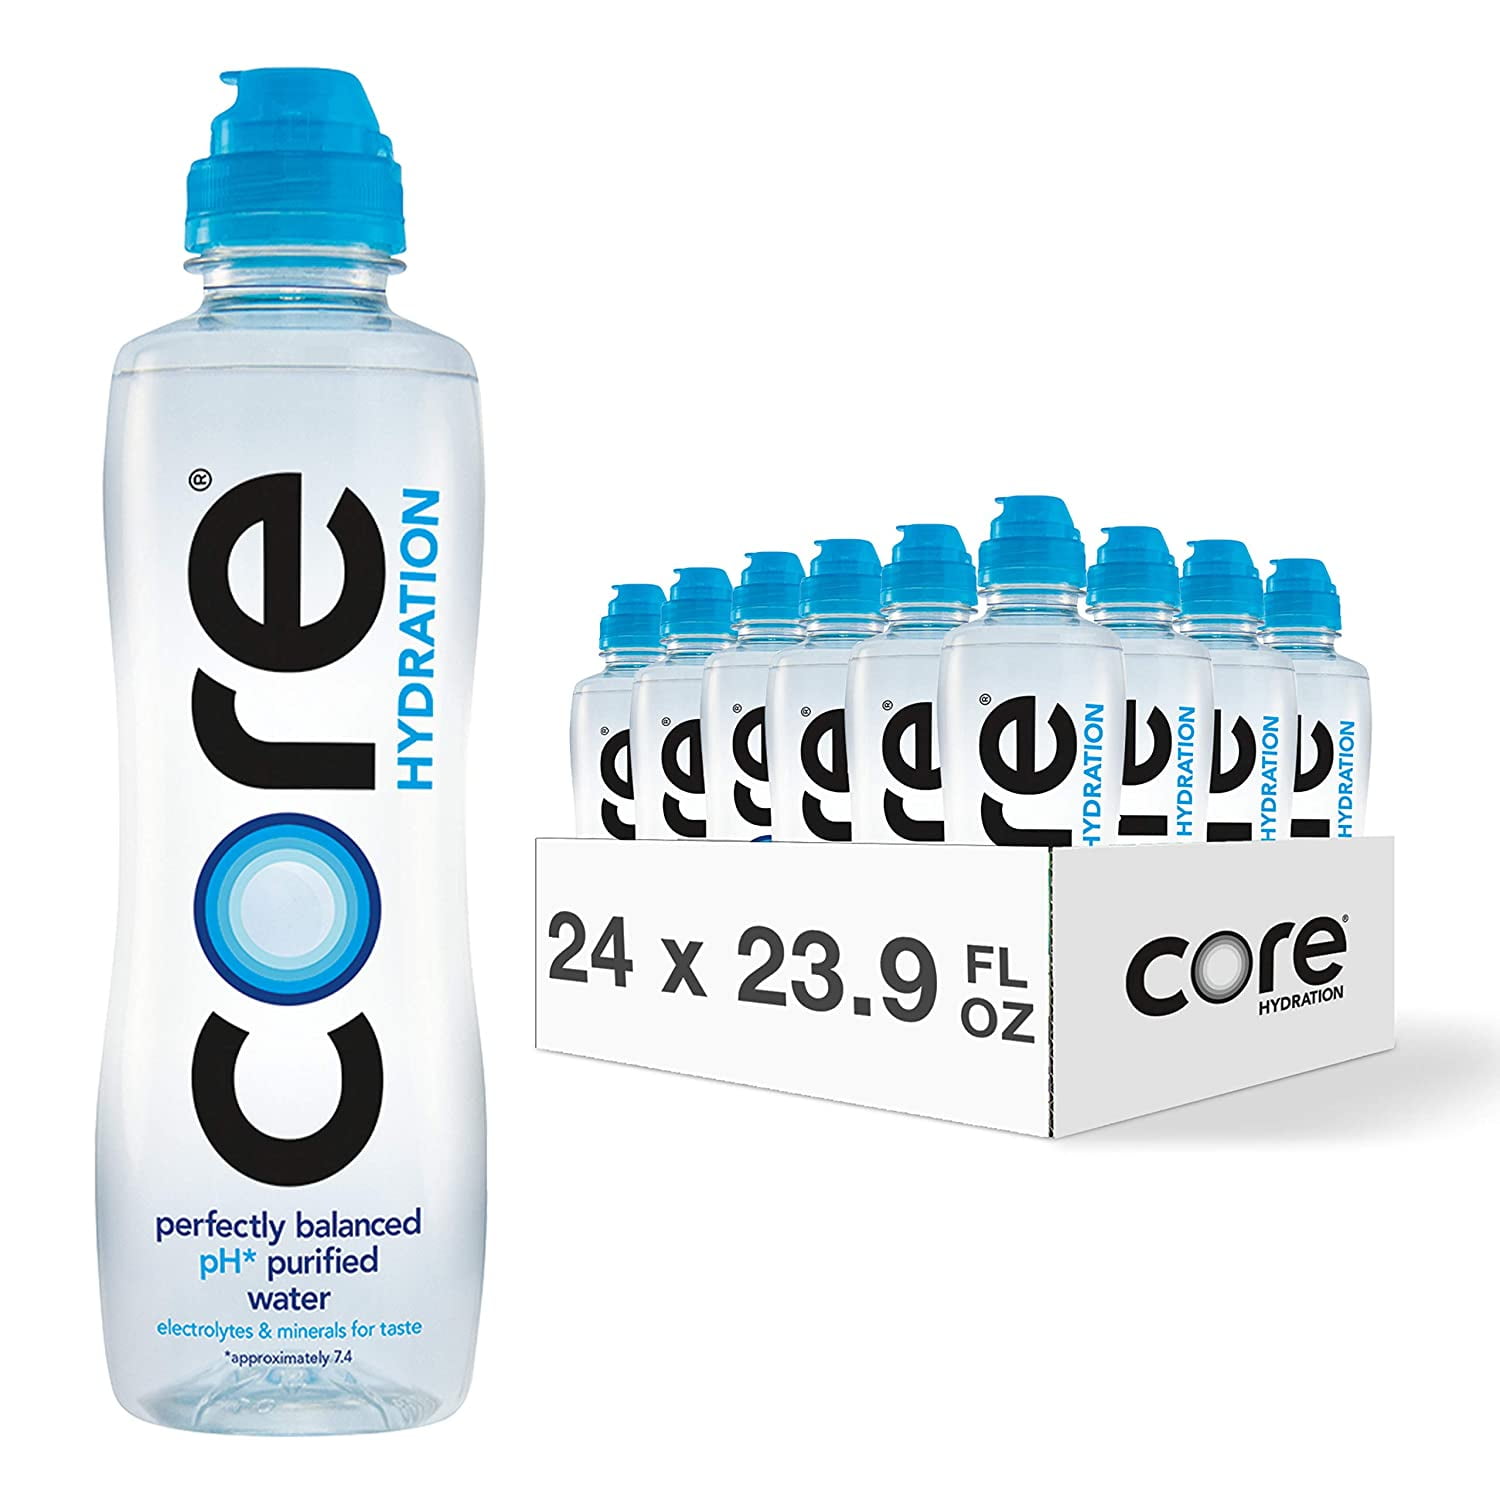 Core Hydration Water, Perfectly Balanced, 6 Pack 6 Ea, Water